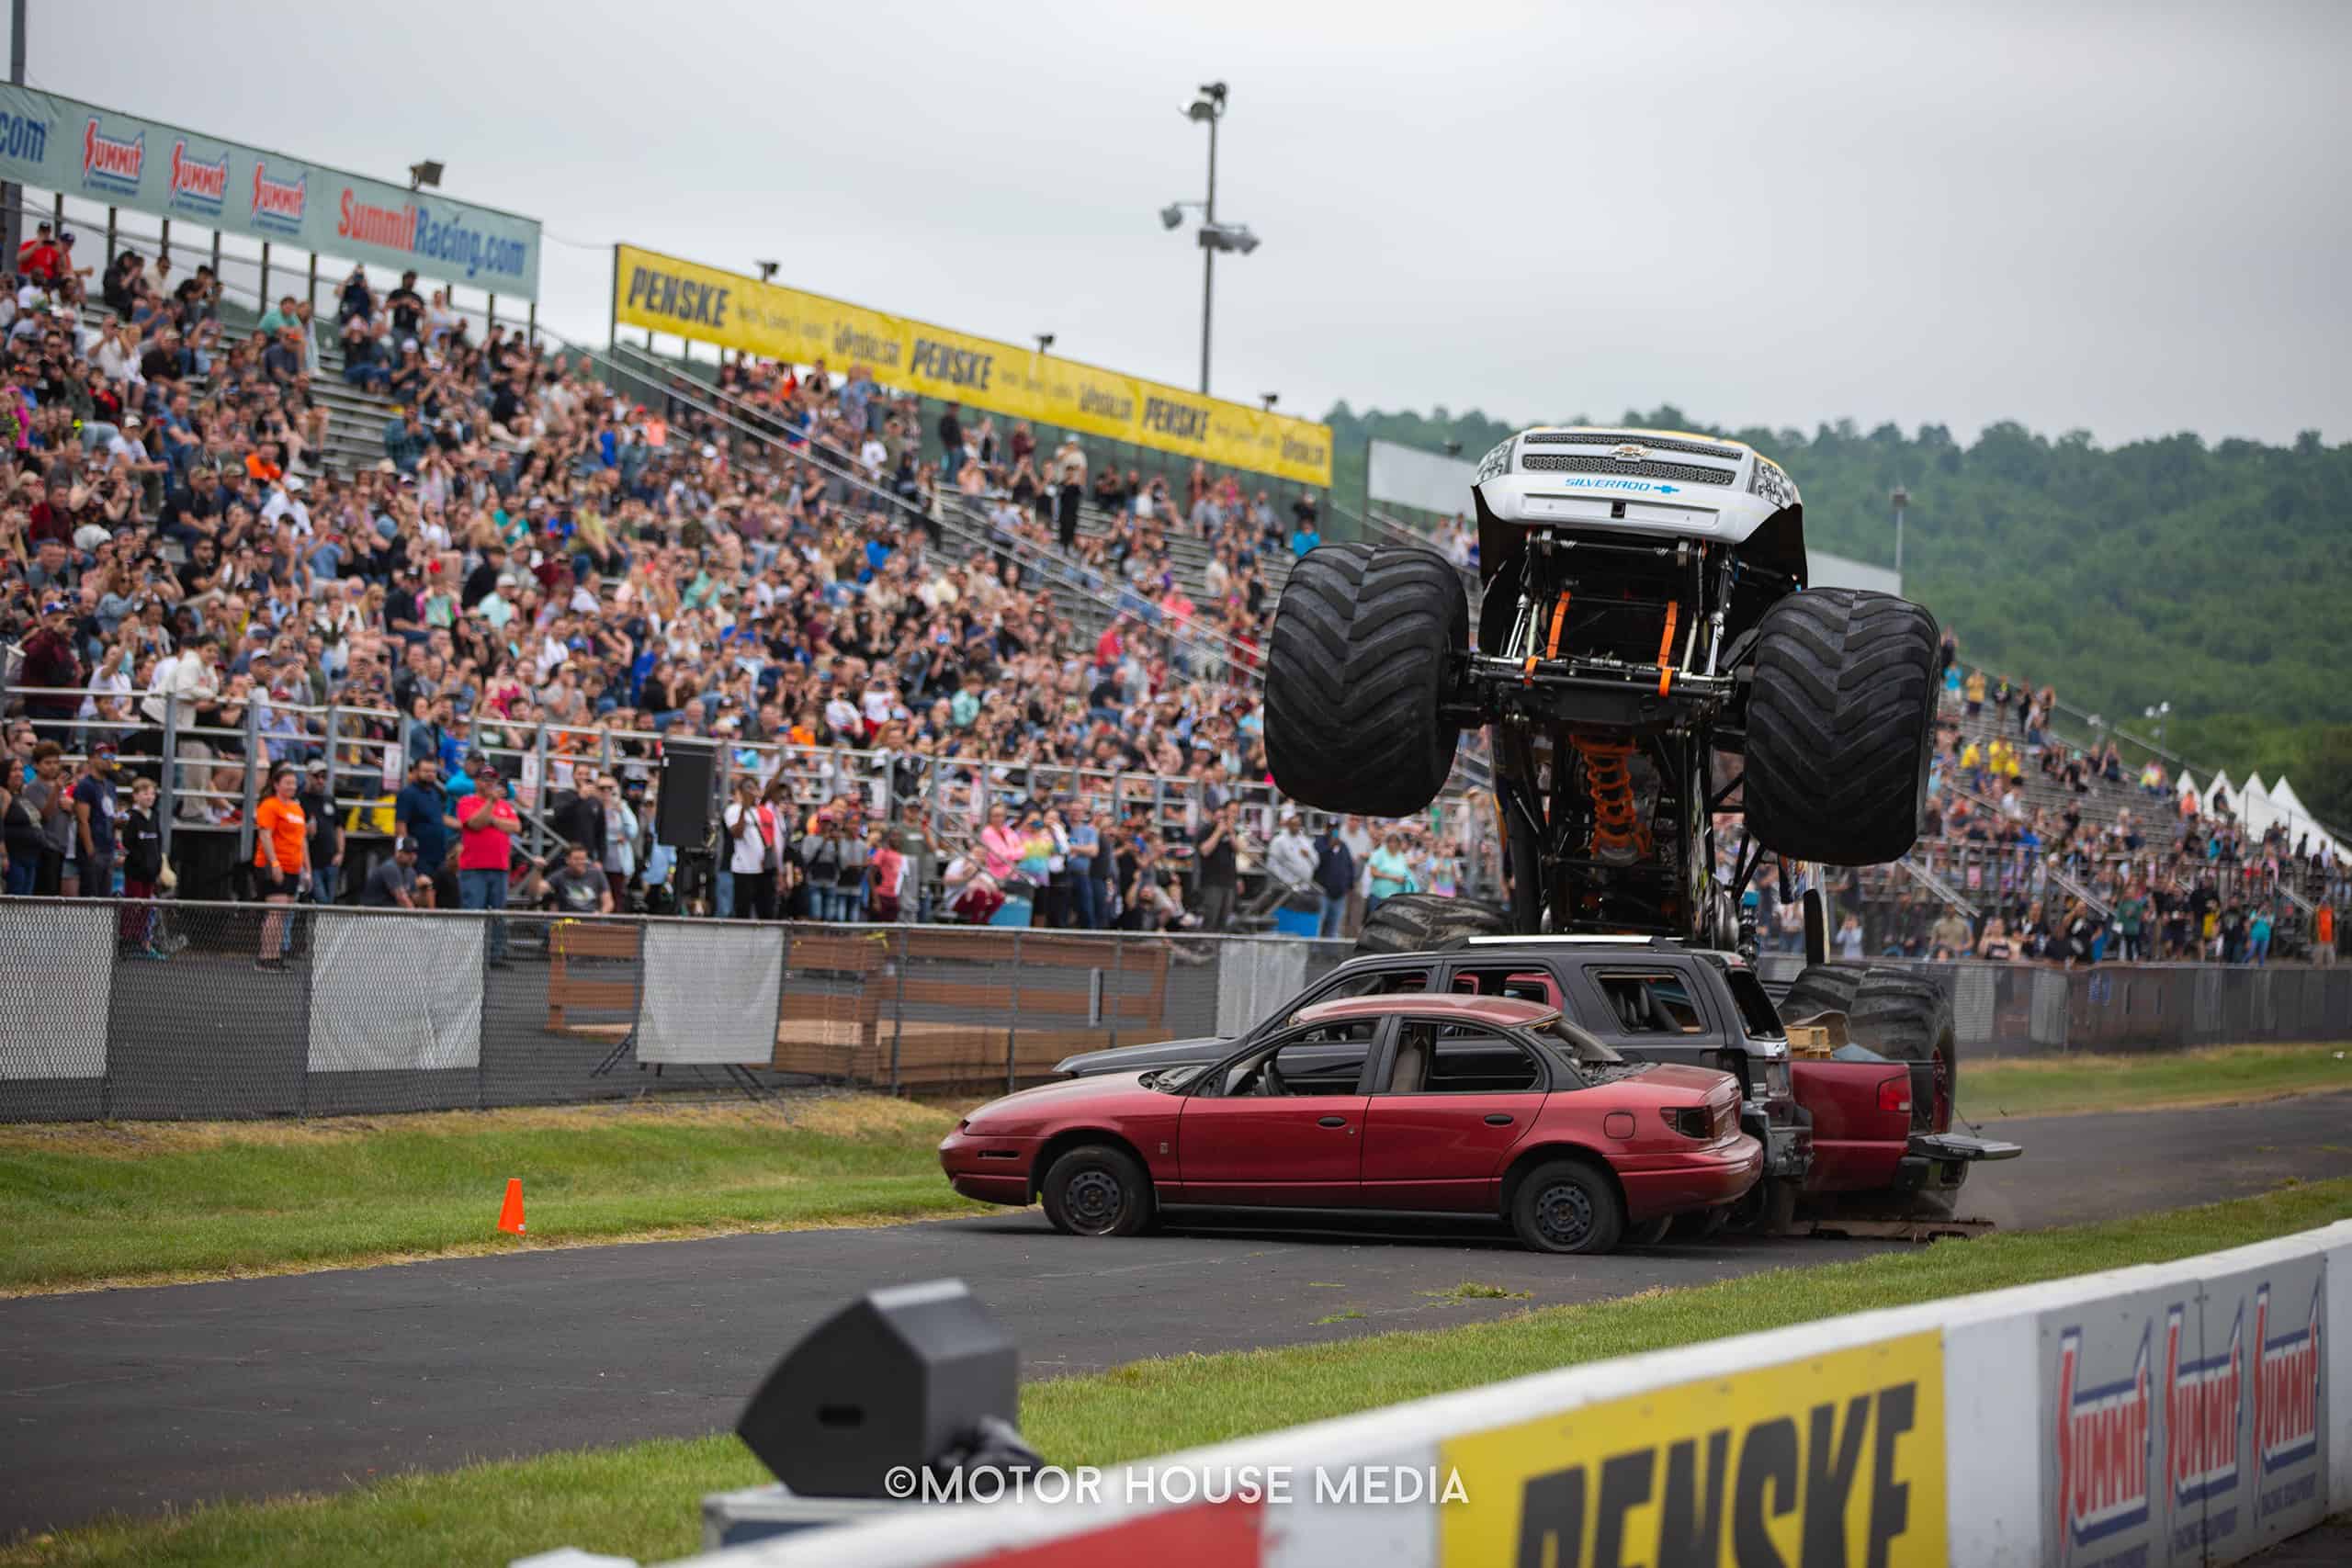 Monster truck in action at The Turn 5 auto show featuring Cars, trucks & Jeeps